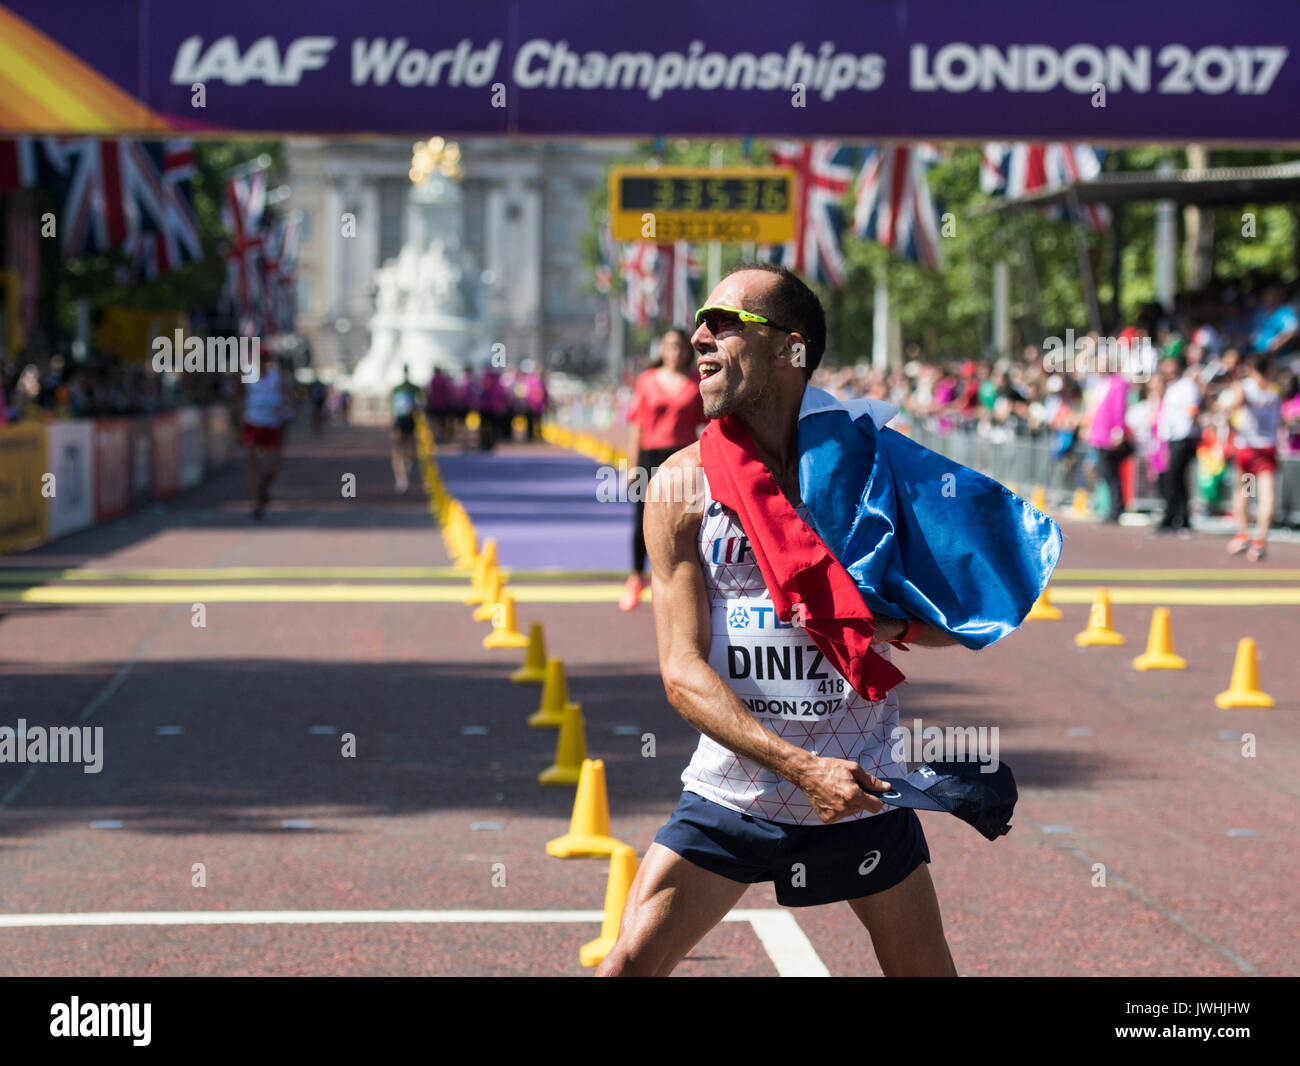 London, UK. 13th Aug, 2017. French athlete Yohann Diniz celebrates after competing in the 50 kilometer marathon at the IAAF London 2017 World Athletics Championships in London, United Kingdom, 13 August 2017. Diniz finished in first place. Photo: Bernd Thissen/dpa/Alamy Live News Stock Photo